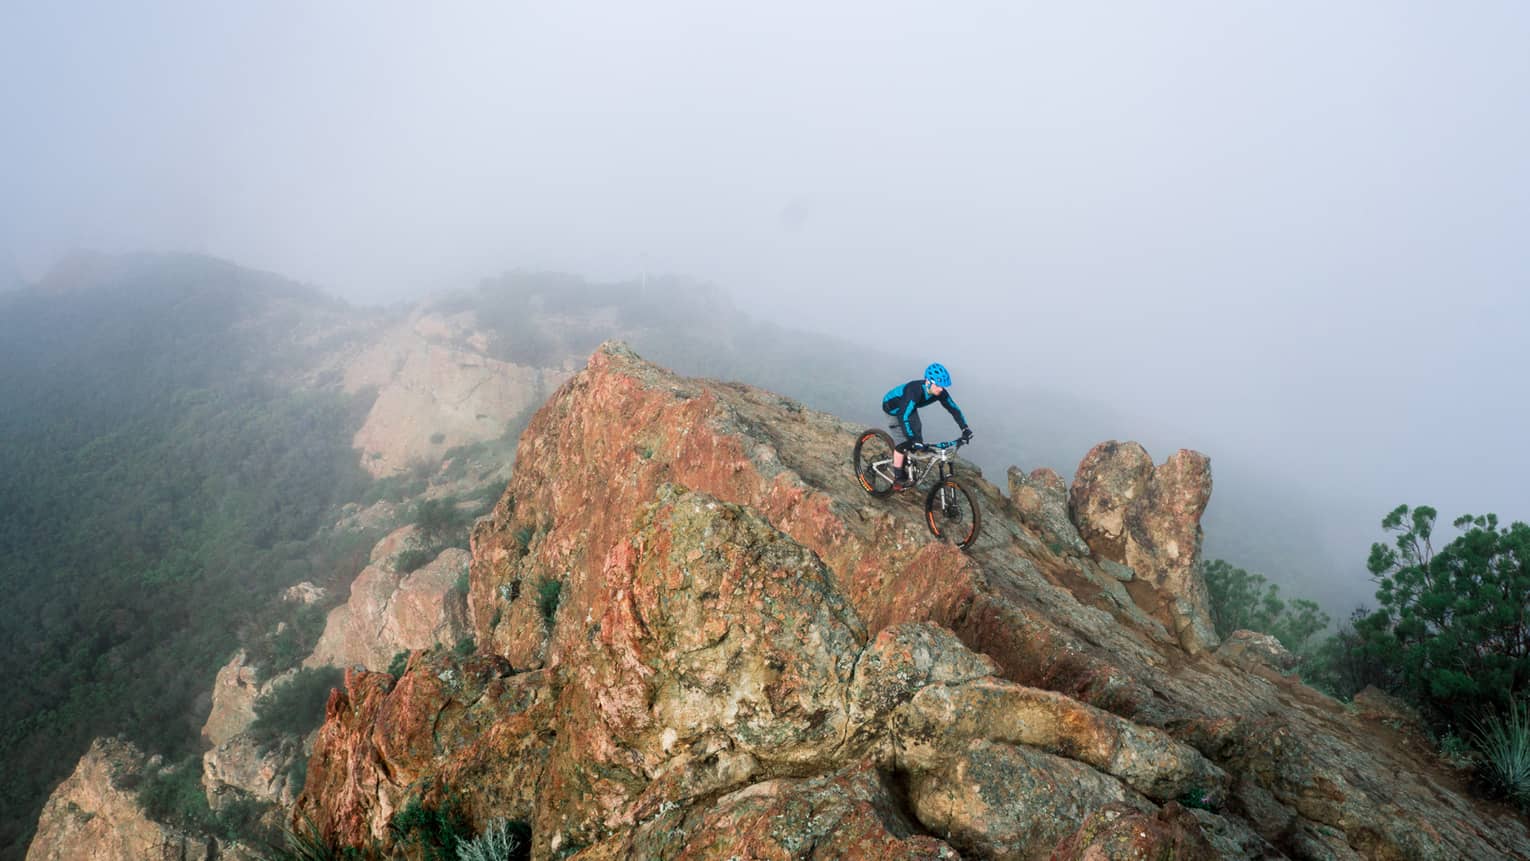 Cyclist rides down large boulder at top of misty mountain